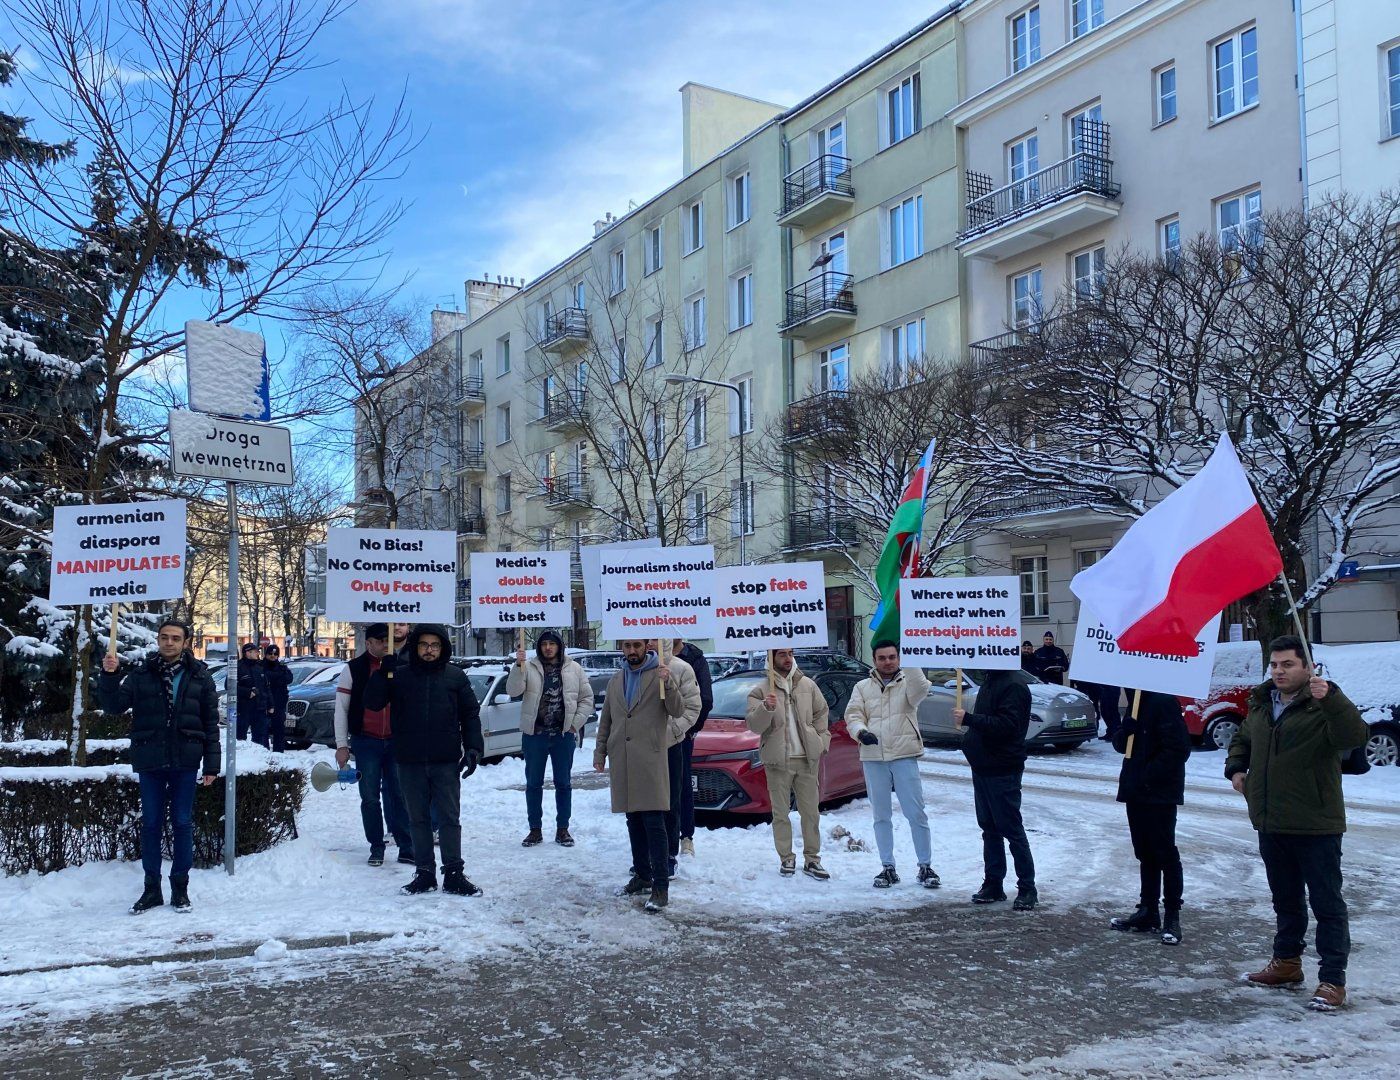 Protest rally held in Warsaw over publication spreading false information about Azerbaijan